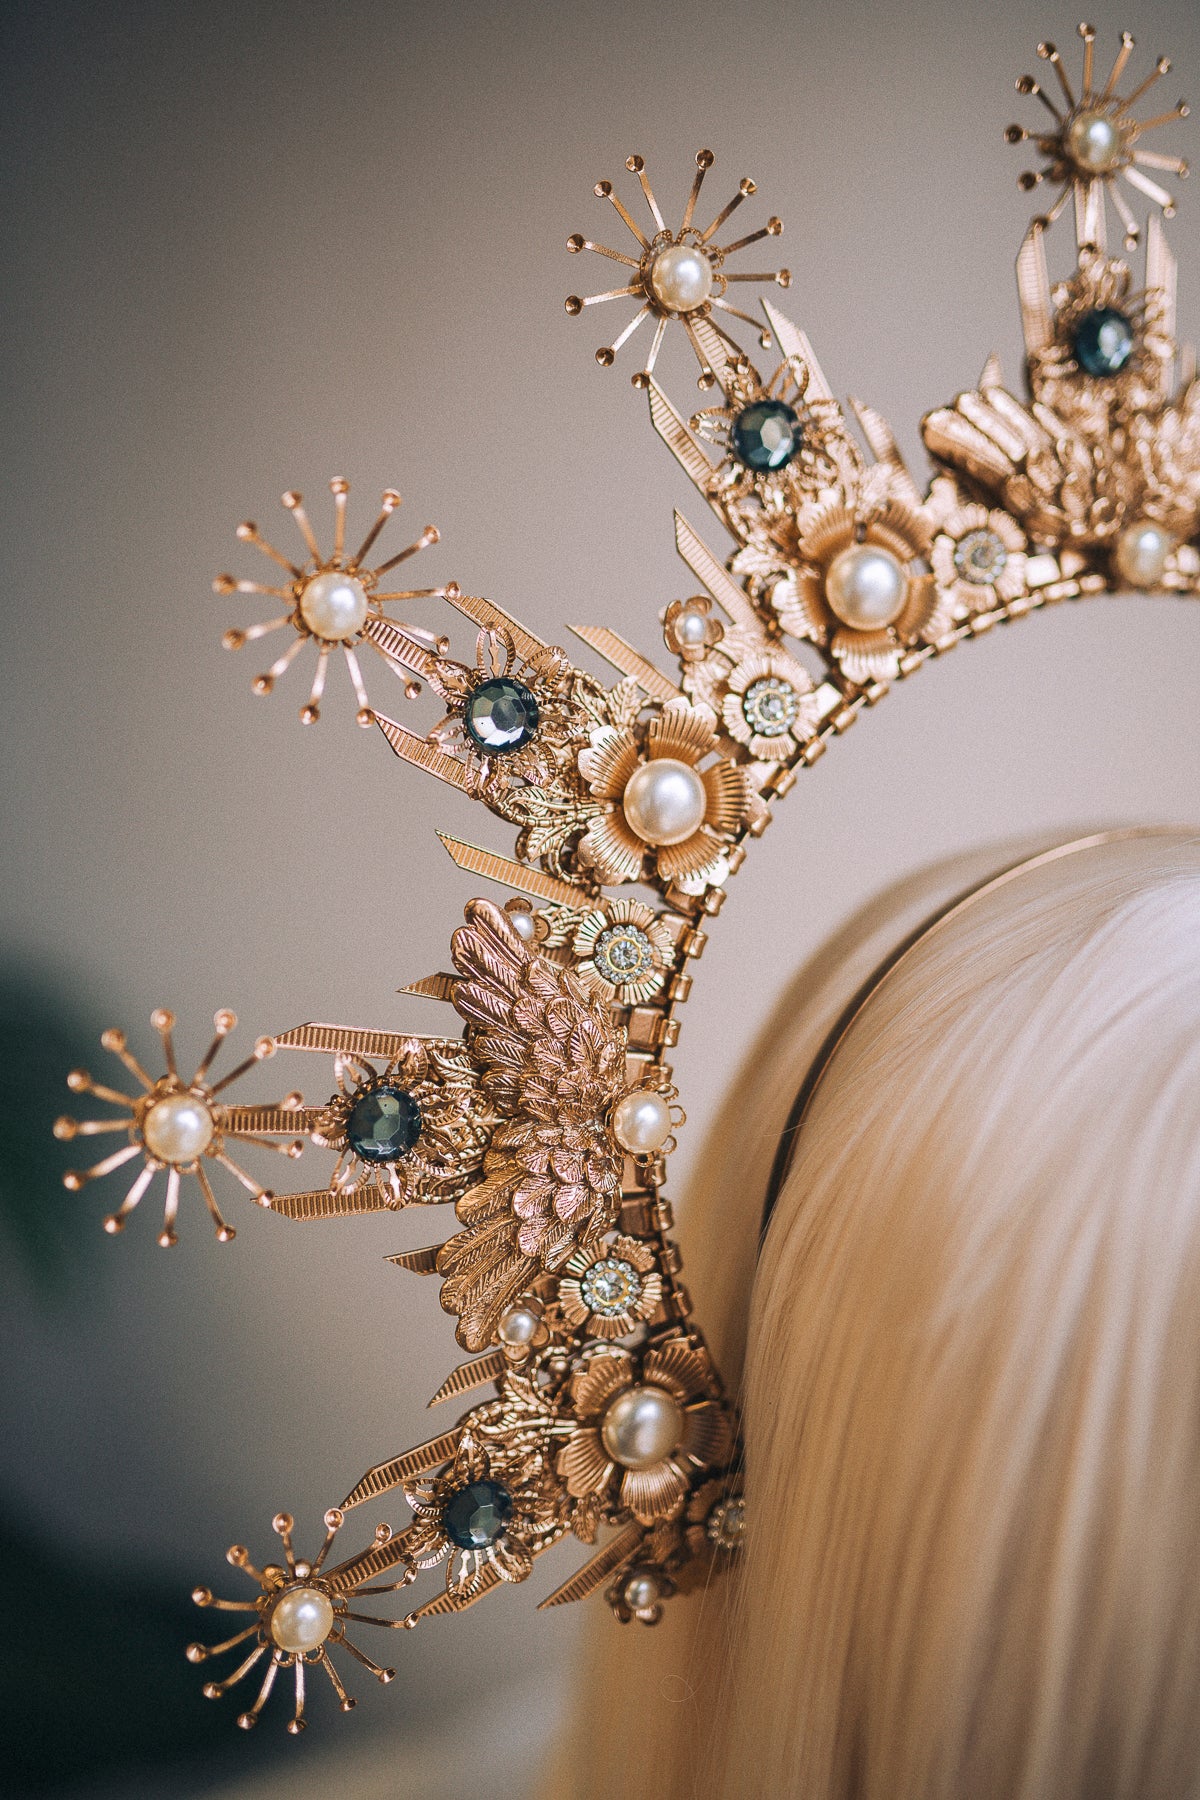 Load image into Gallery viewer, Gold Halo Crown Wedding Headpiece
